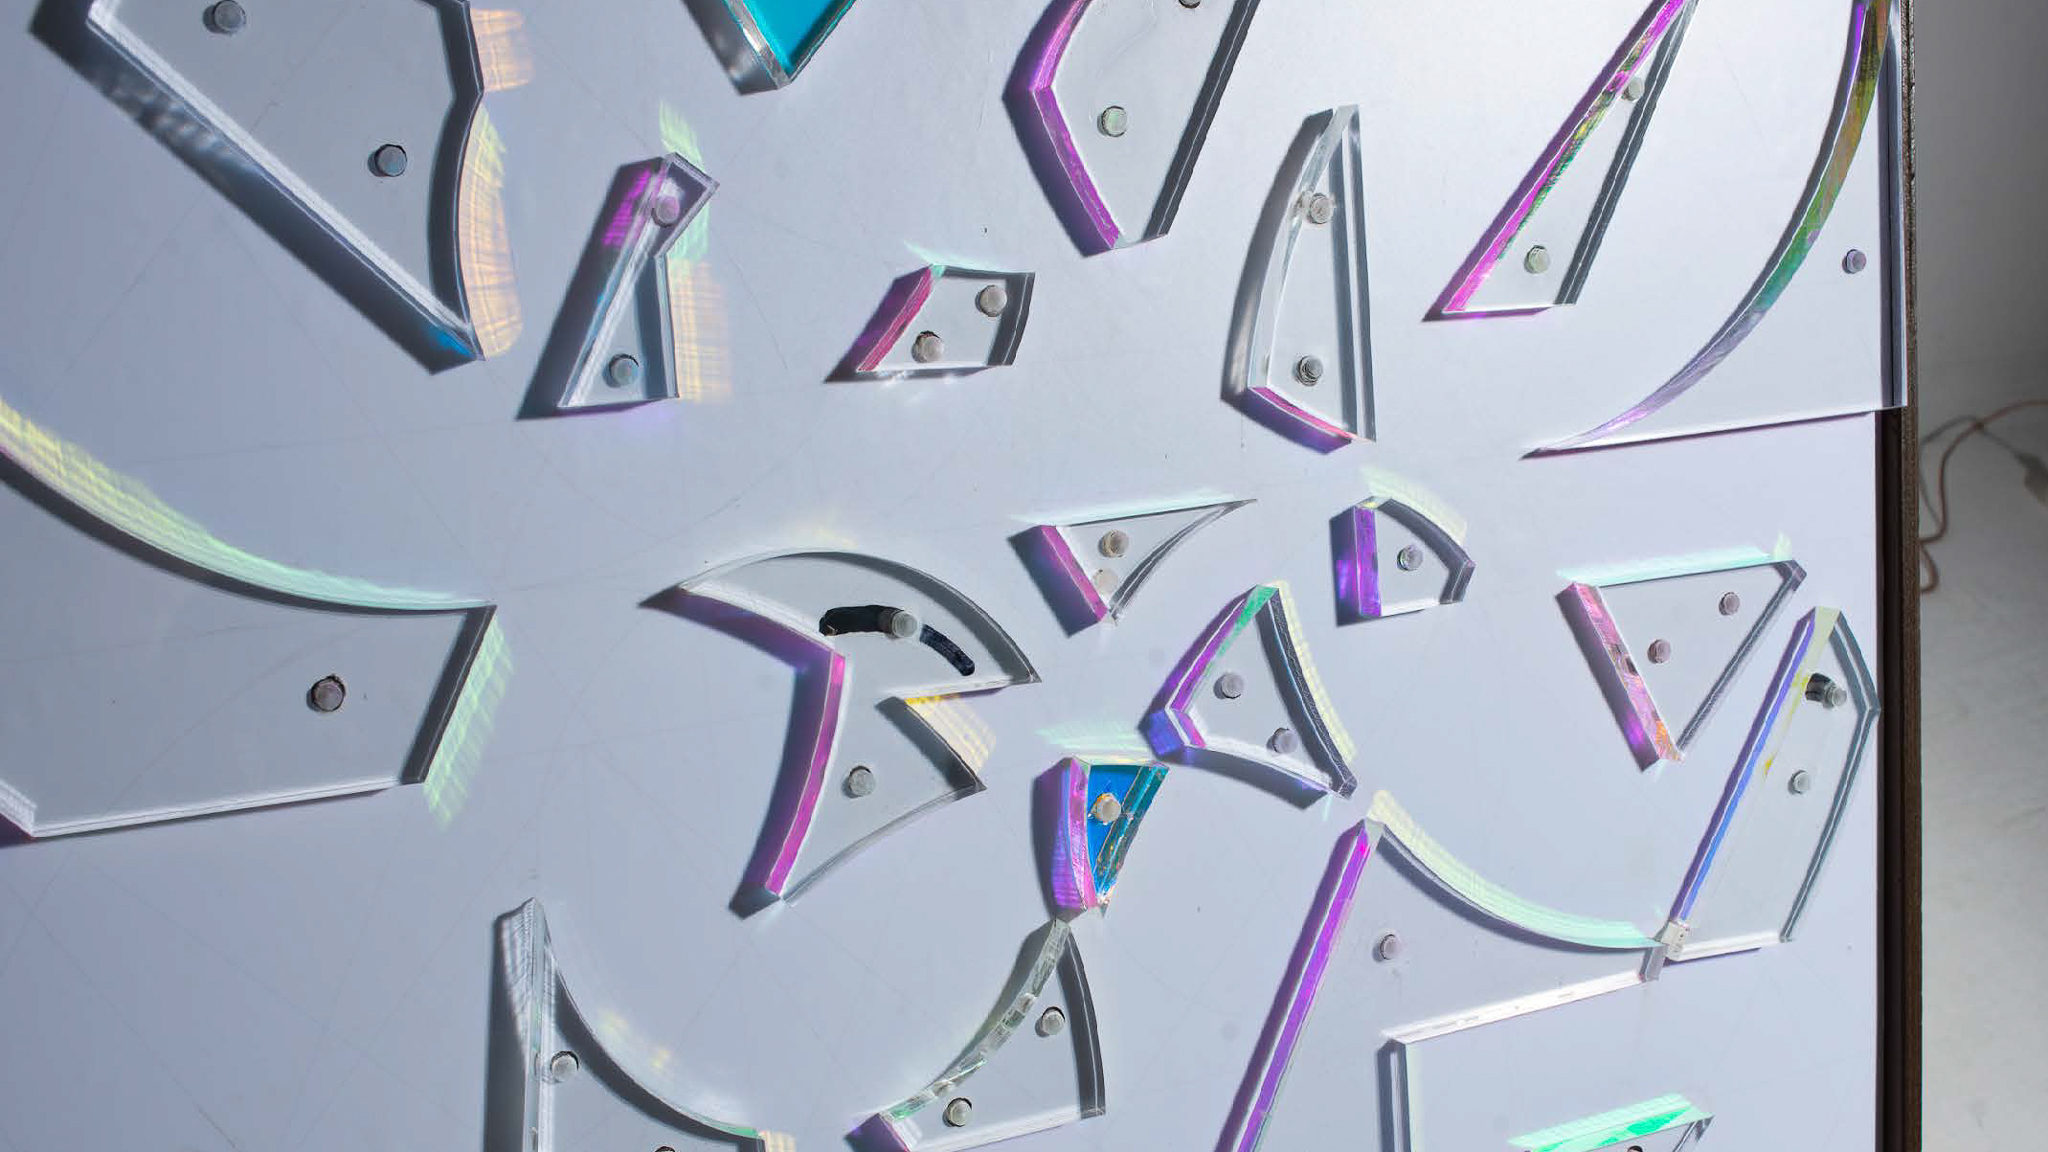 Angled view of Frameworks: Of The Mind. Dichroic prisms placed as obstacles on white board.